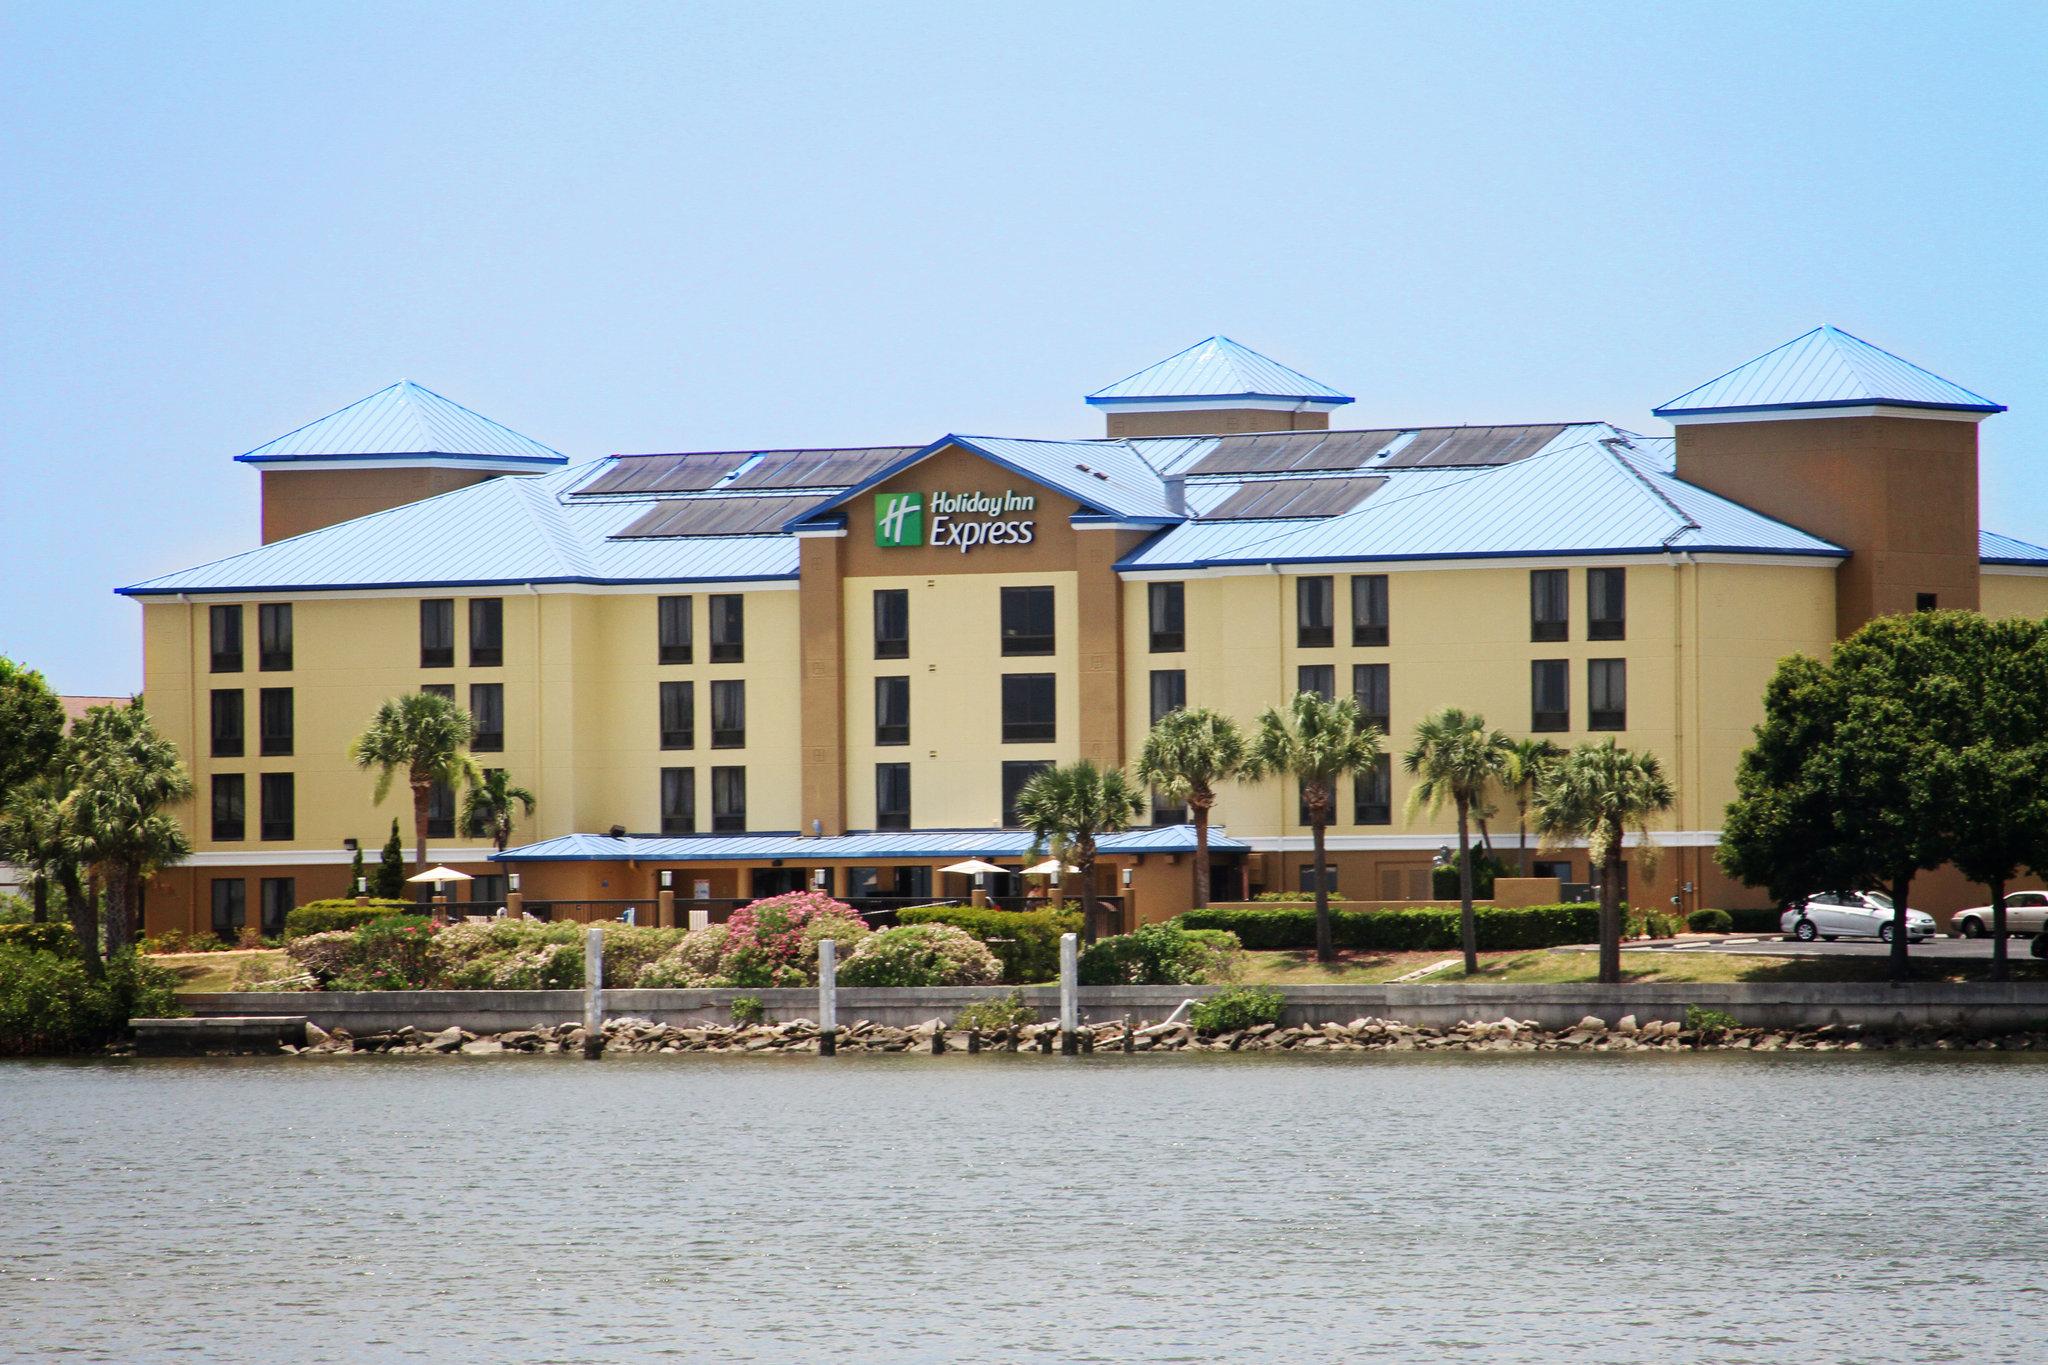 Holiday Inn Express & Suites Tampa/Rocky Point Island in Tampa, FL